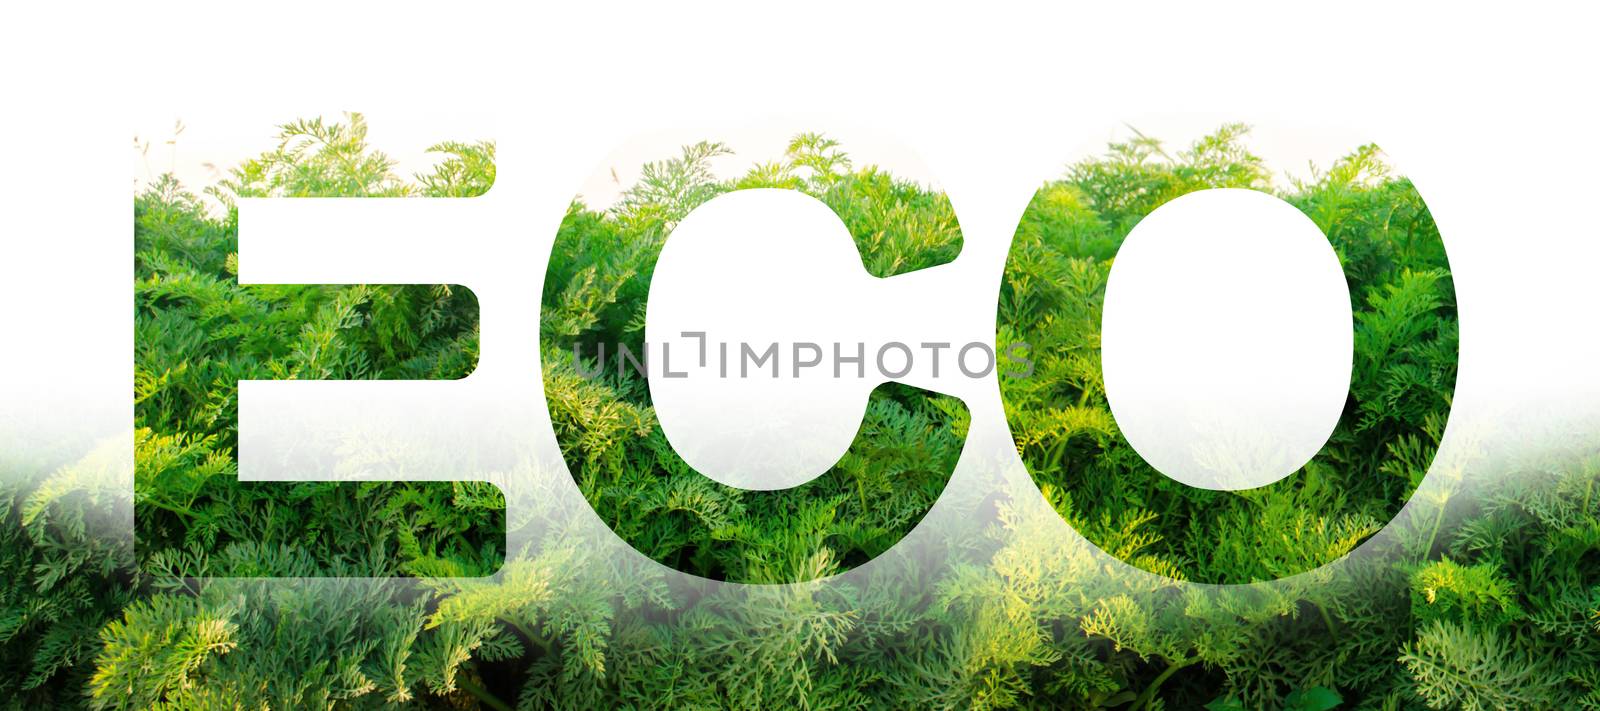 Eco word on the background of green leaves of carrots. plantation. Agriculture. harvest. Environmentally friendly, climate change, quality control, use safe pesticides. Organic vegetables. by iLixe48